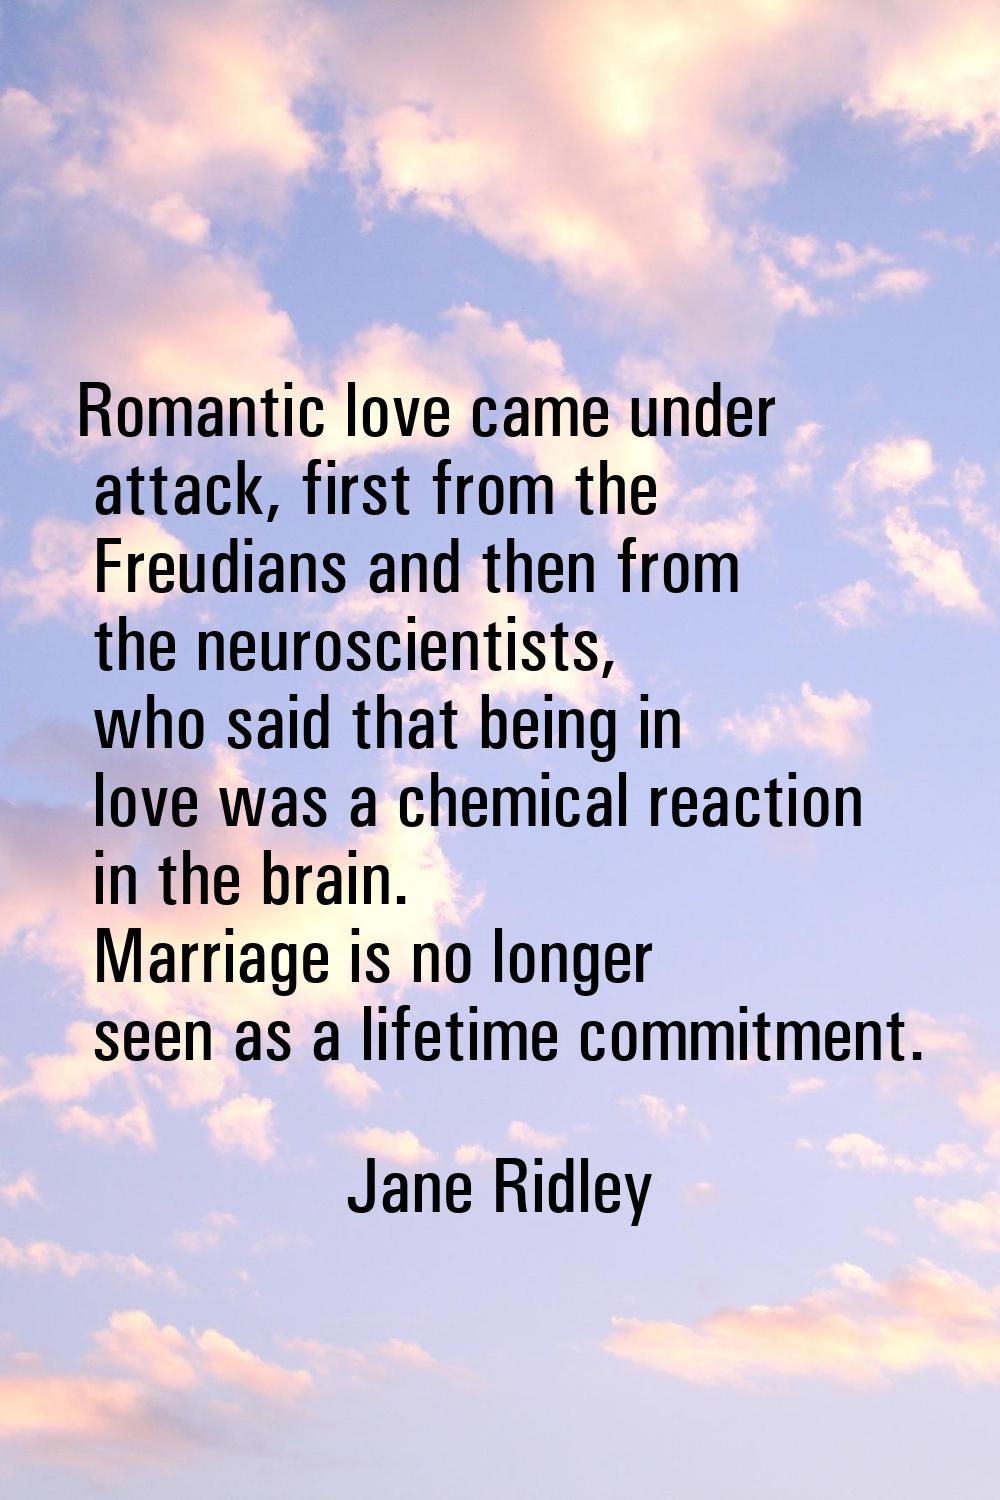 Romantic love came under attack, first from the Freudians and then from the neuroscientists, who sa